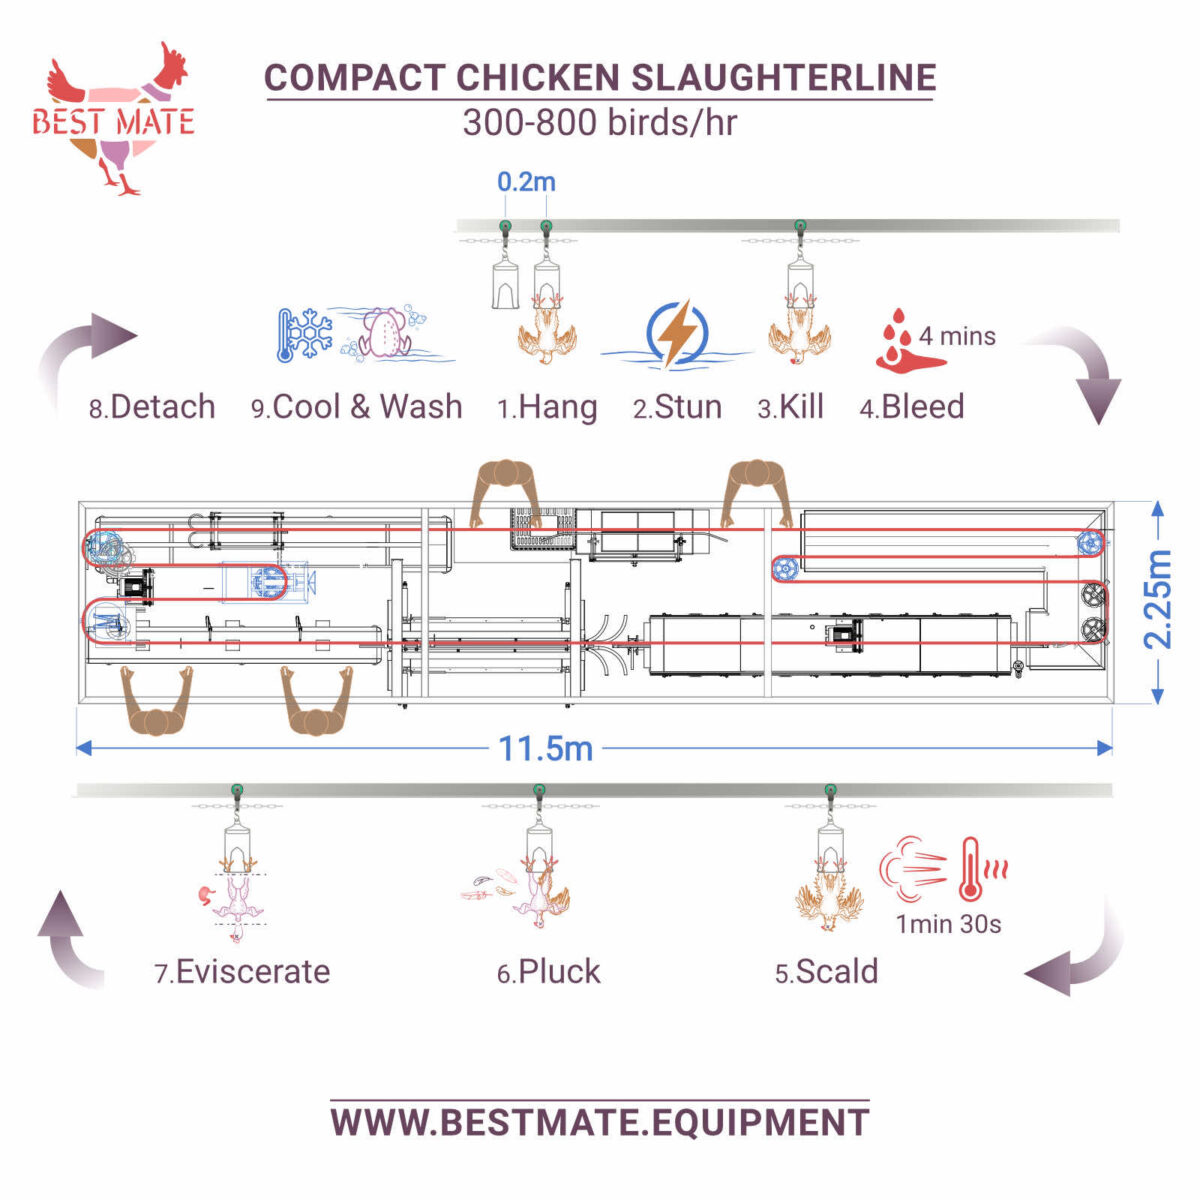 Compact poultry abattoir Layout plan